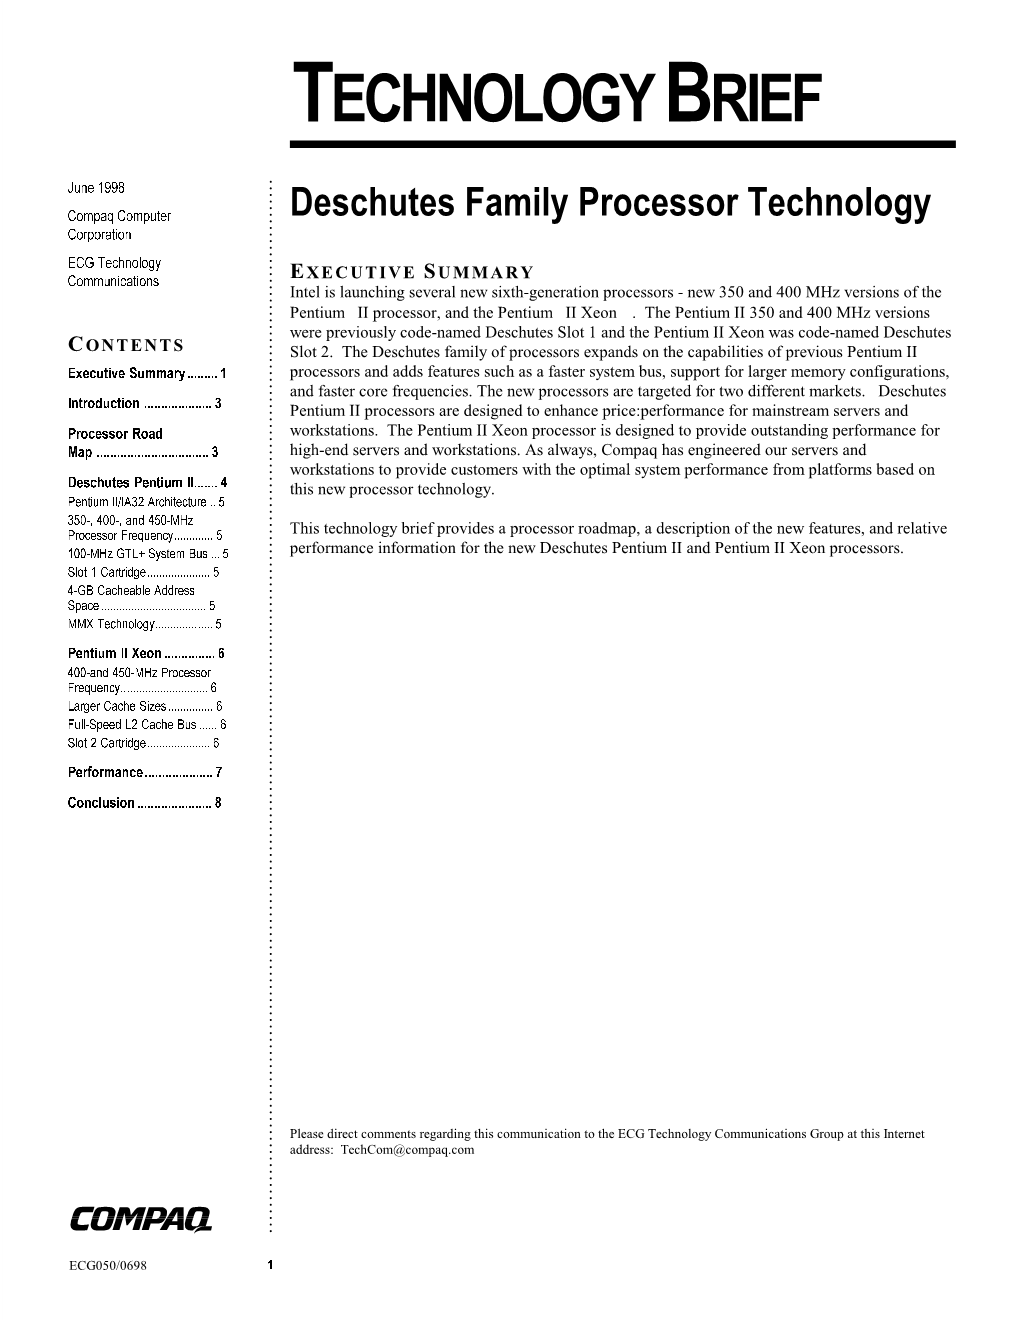 Technology Brief Provides a Processor Roadmap, a Description of the New Features, and Relative 3URFHVVRU )UHTXHQF\ 